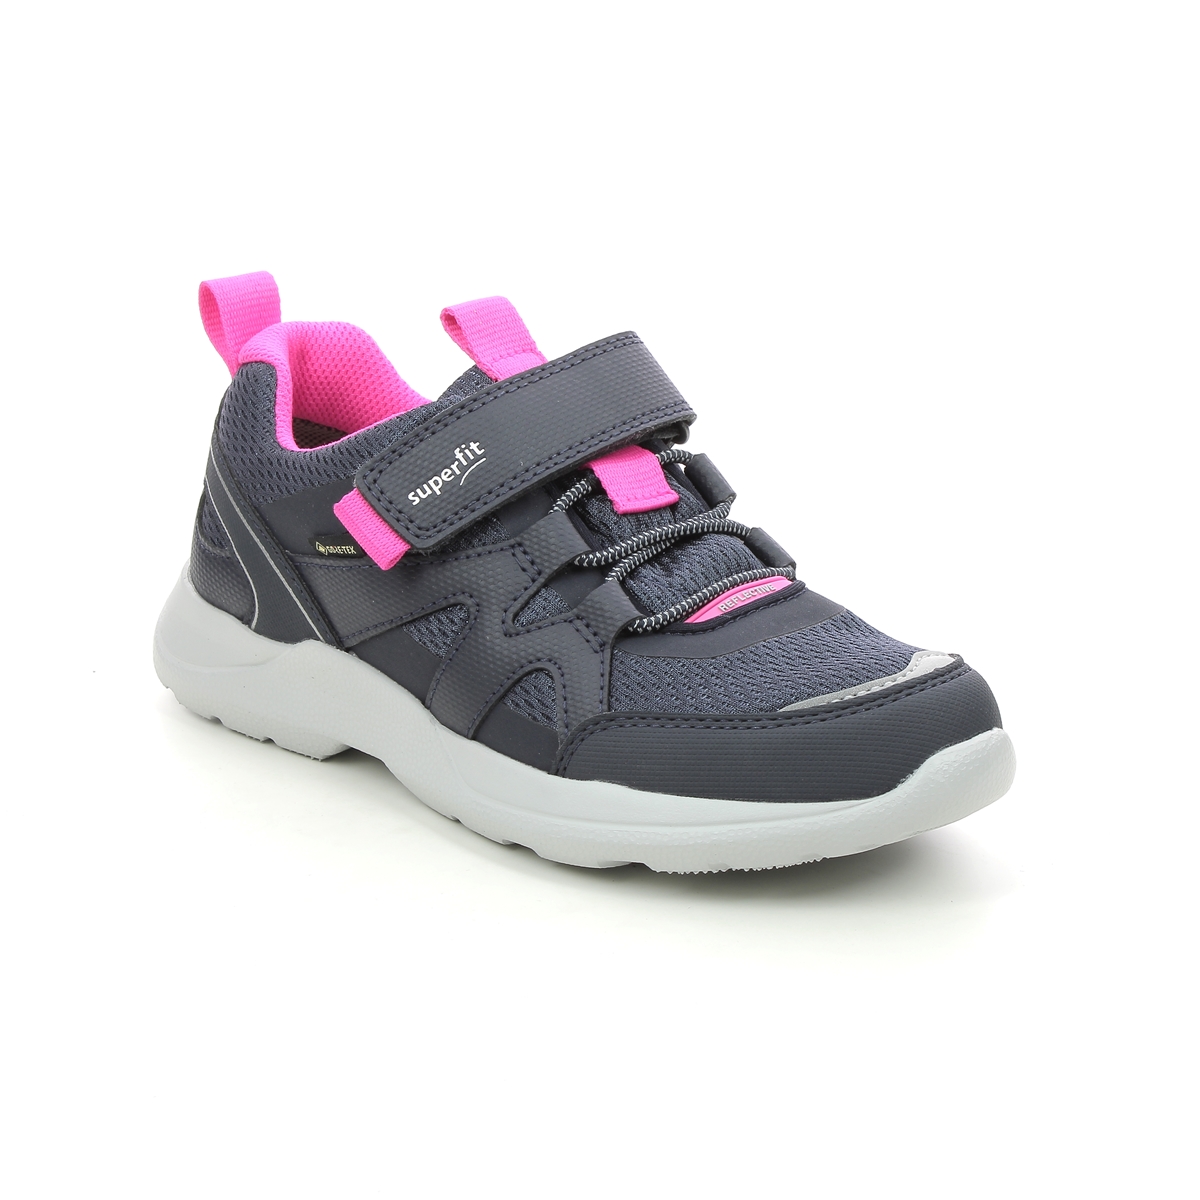 Superfit Rush Jnr G Gtx Navy Pink Kids Girls Trainers 1006219-8020 In Size 33 In Plain Navy Pink For kids